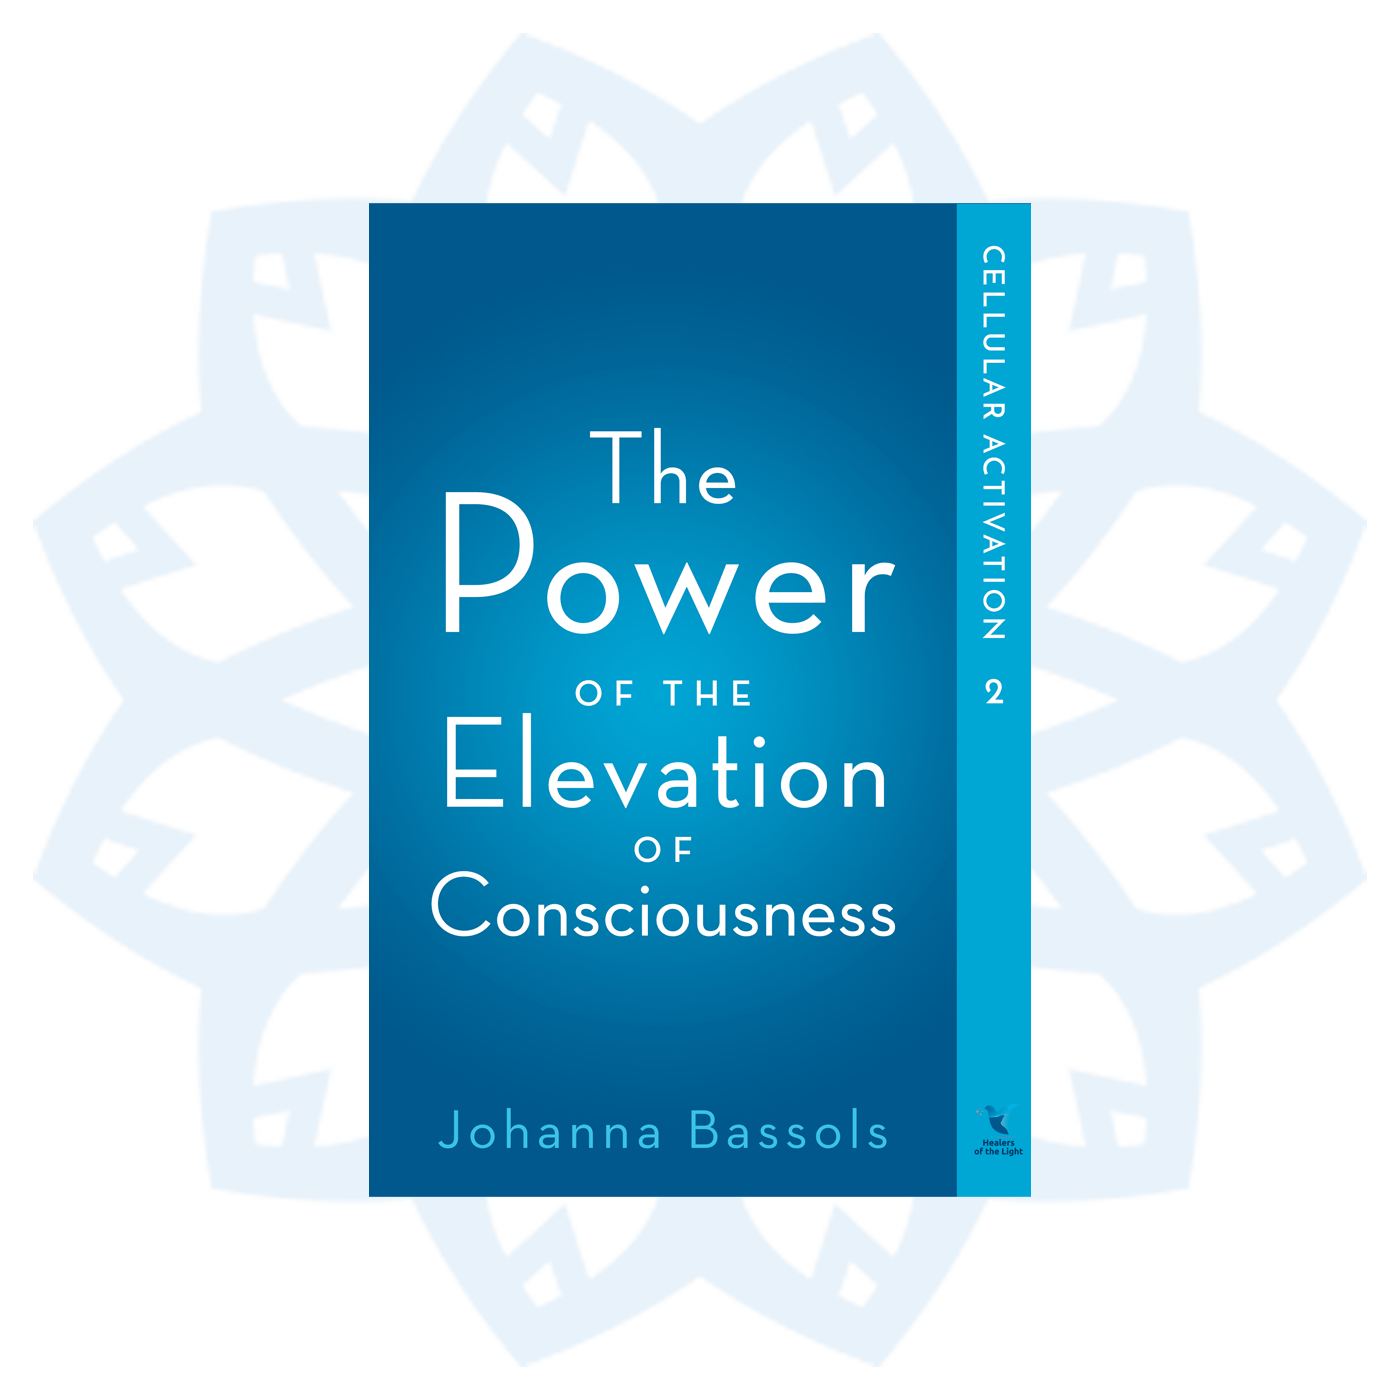 Book 2: The Power of the Elevation of Consciousness, Cellular Activation